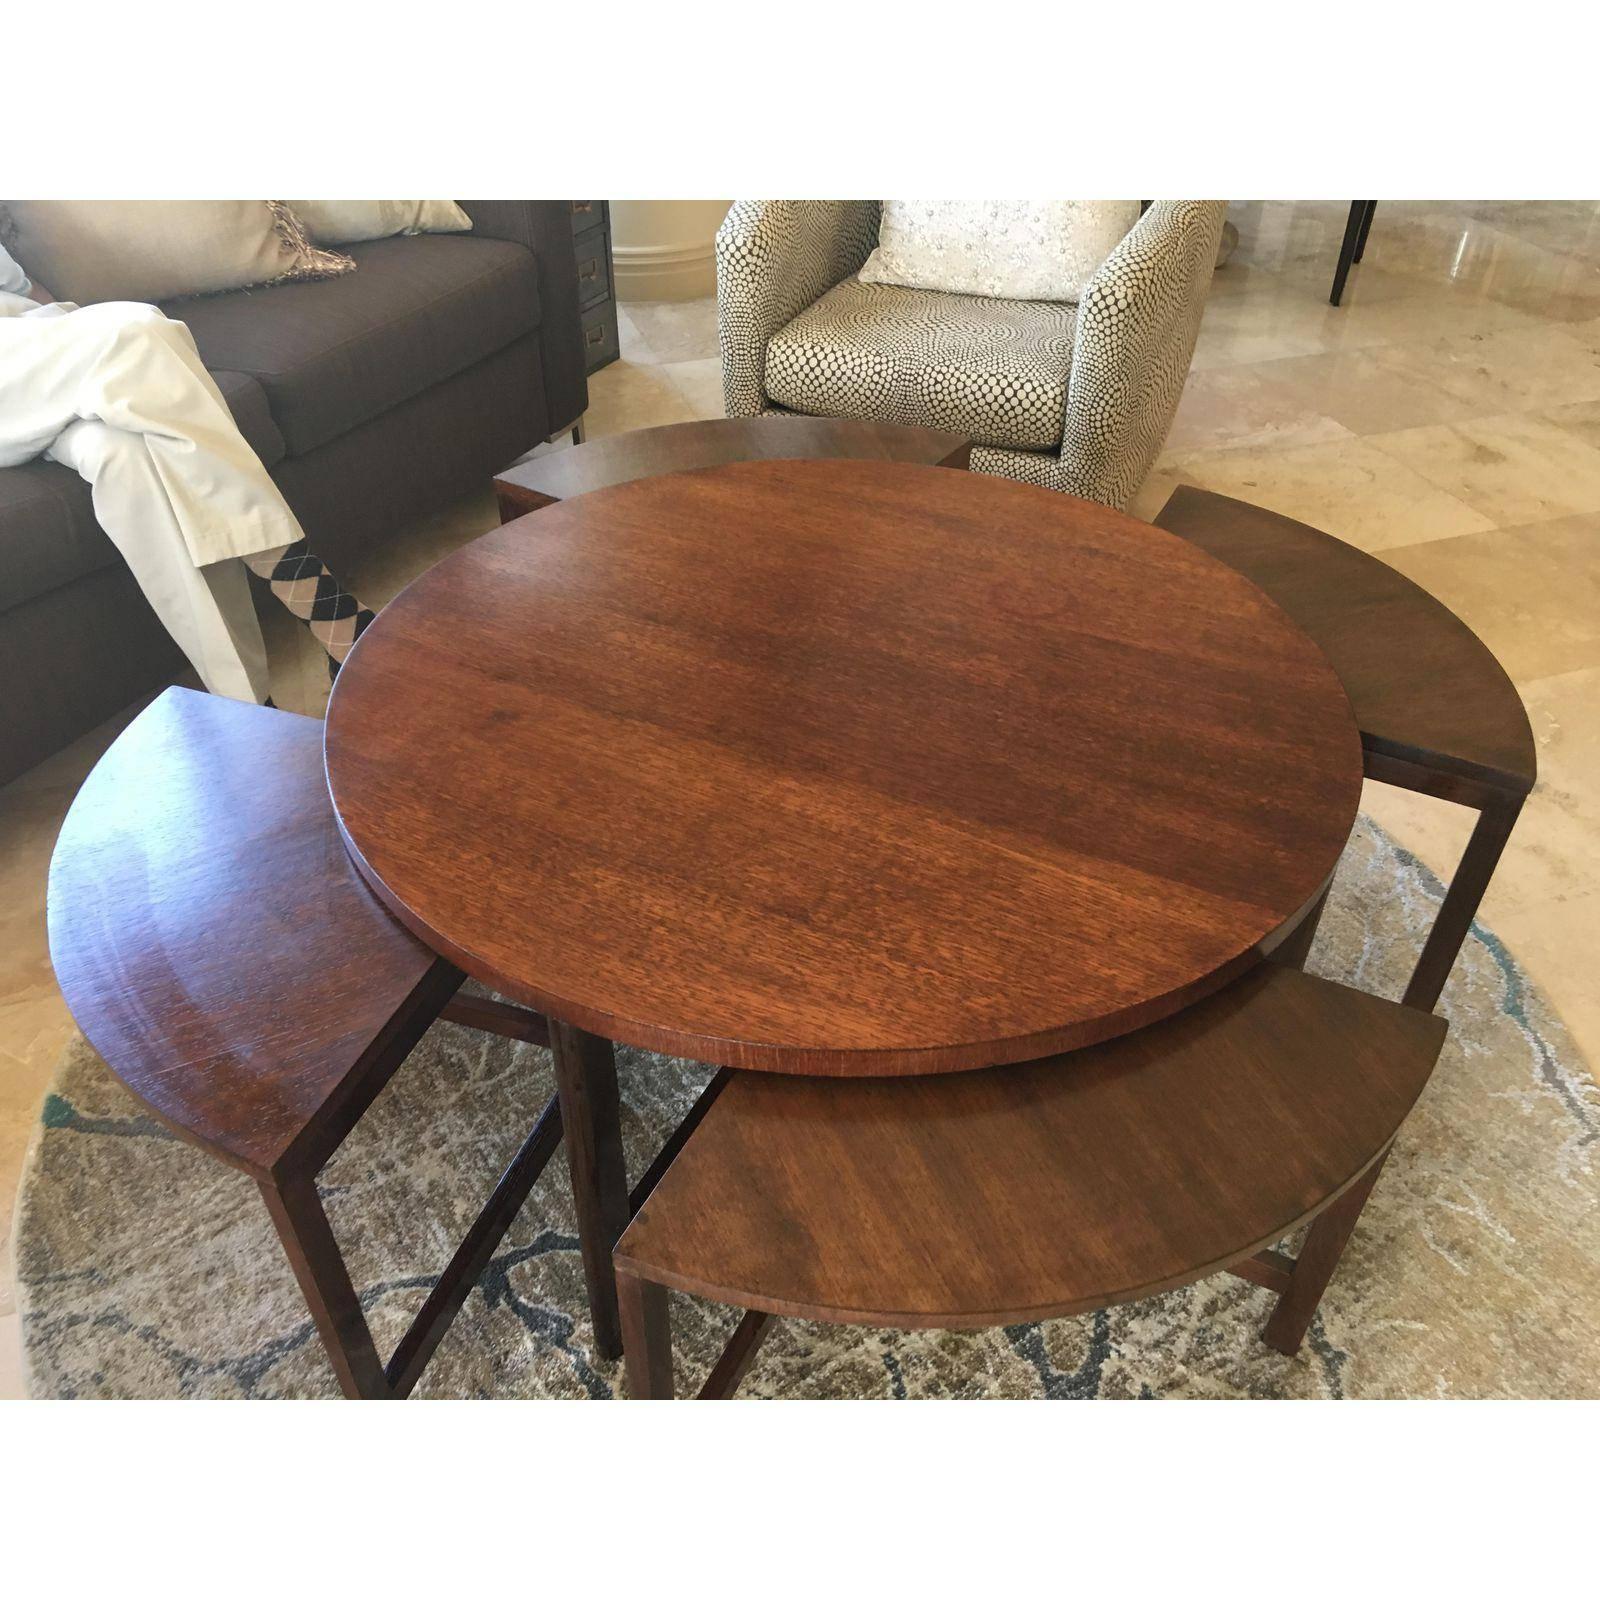 A really clever midcentury design, yields a round cocktail table and four additional triangular tables/benches nested underneath, for additional seating or table surface.
This is one of the pieces that is so useful, and good looking. Particularly